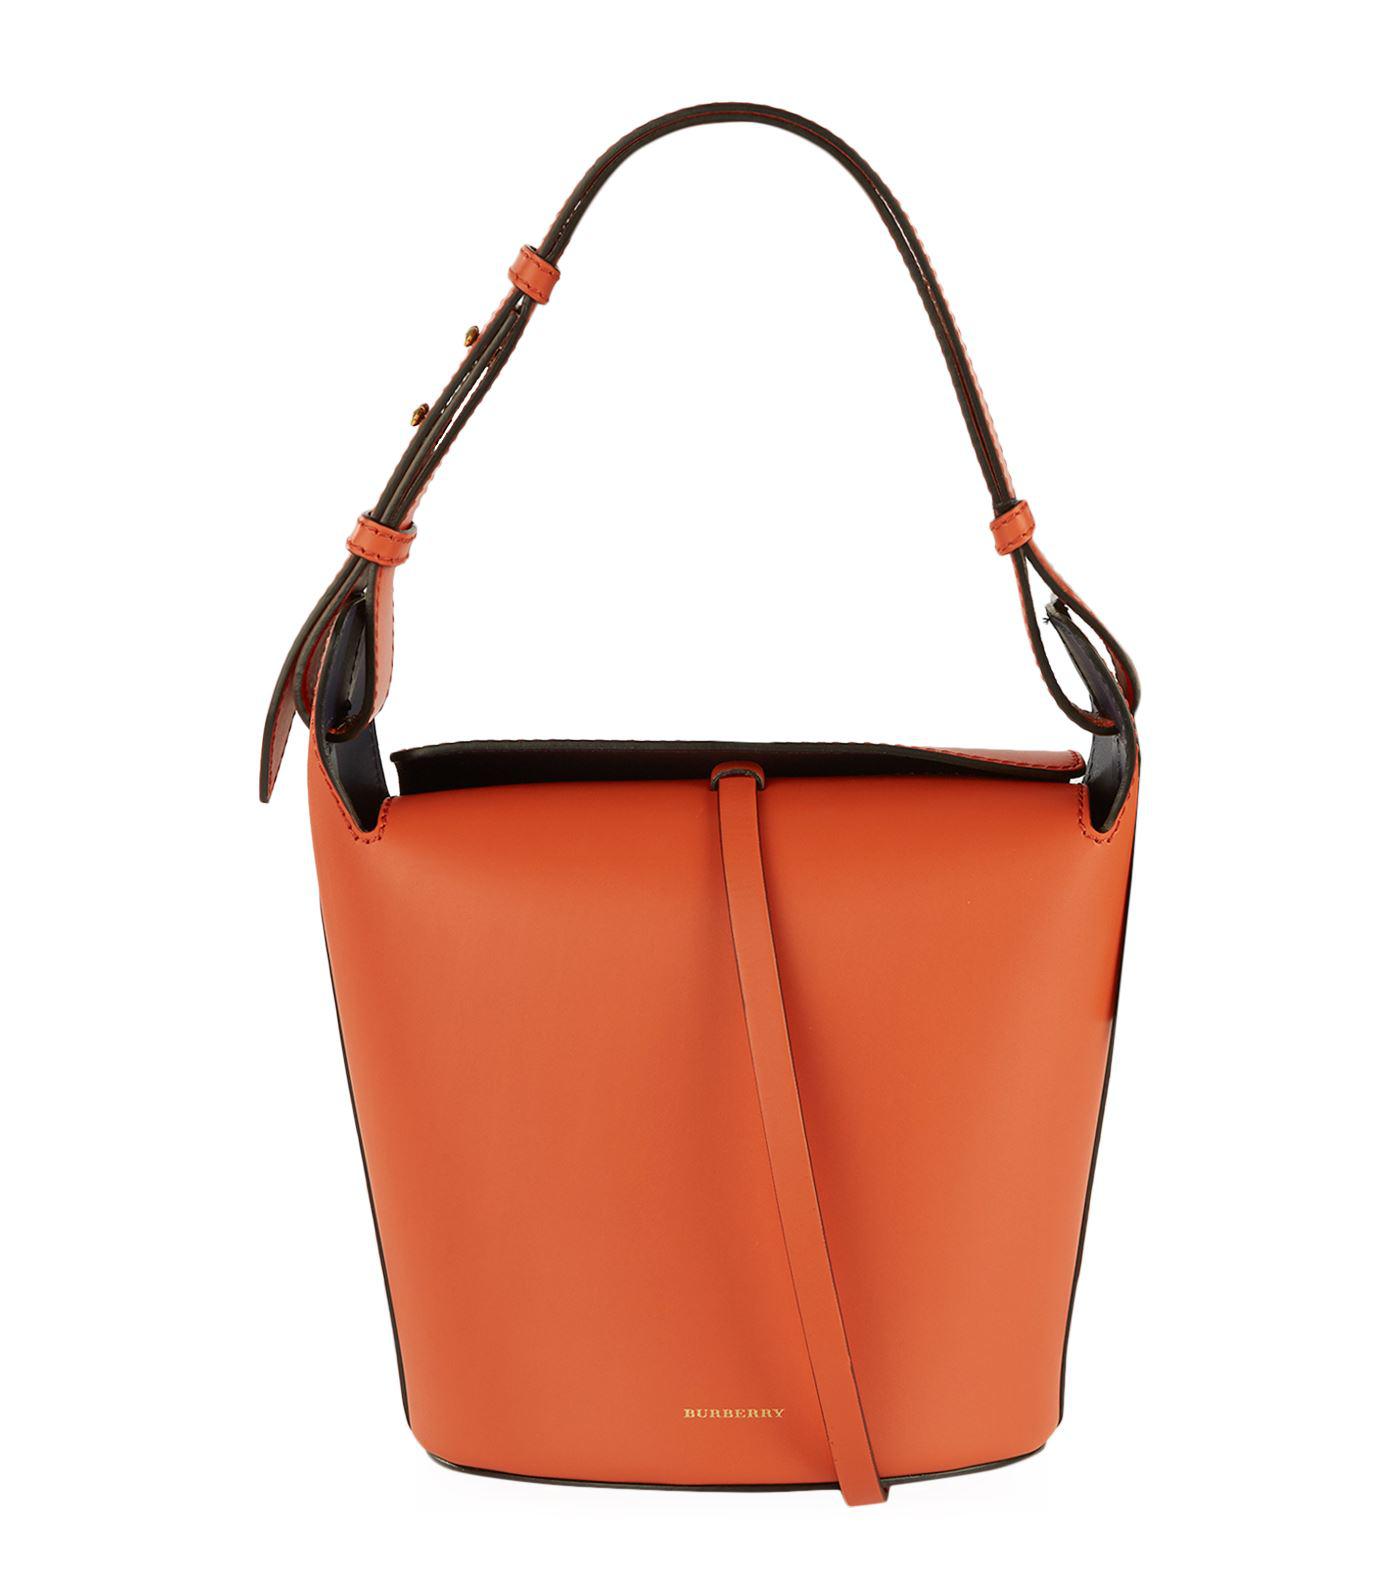 Burberry Small Leather Bucket Bag in Orange - Lyst